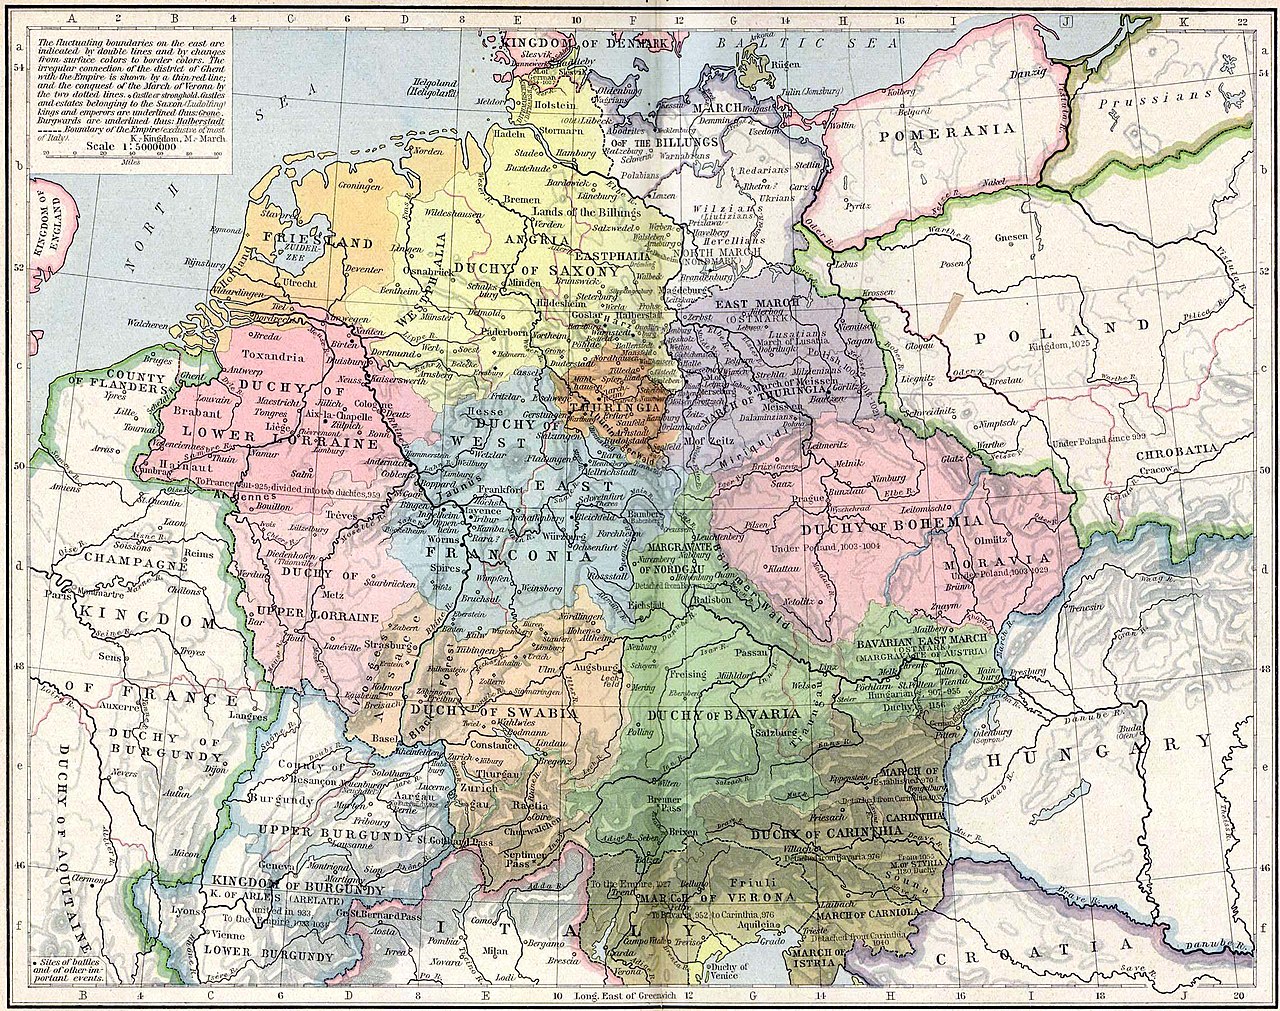 MAP, SAXONY AND OTHER STEM DUCHIES, C. 11TH-EARLY 12TH C..jpg